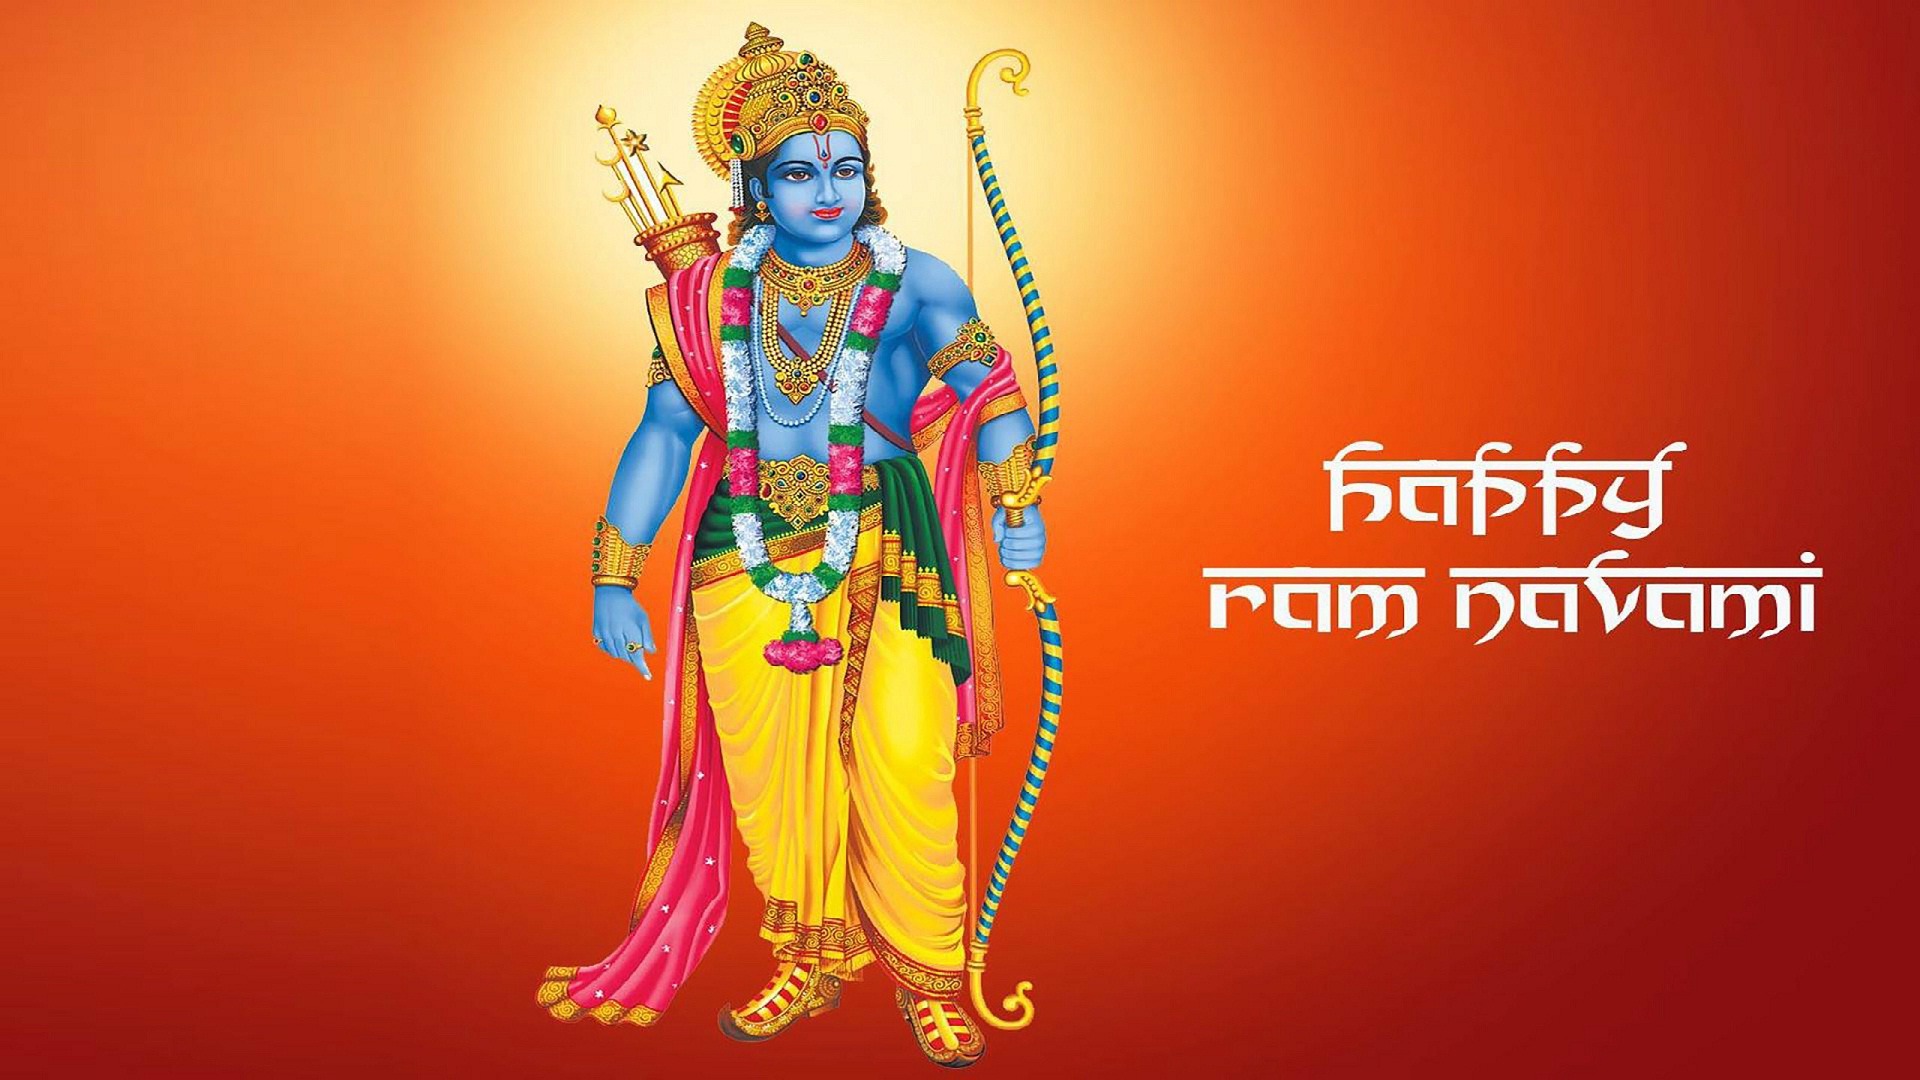 lord rama hd wallpapers for mobile,graphic design,graphics,fictional character,art